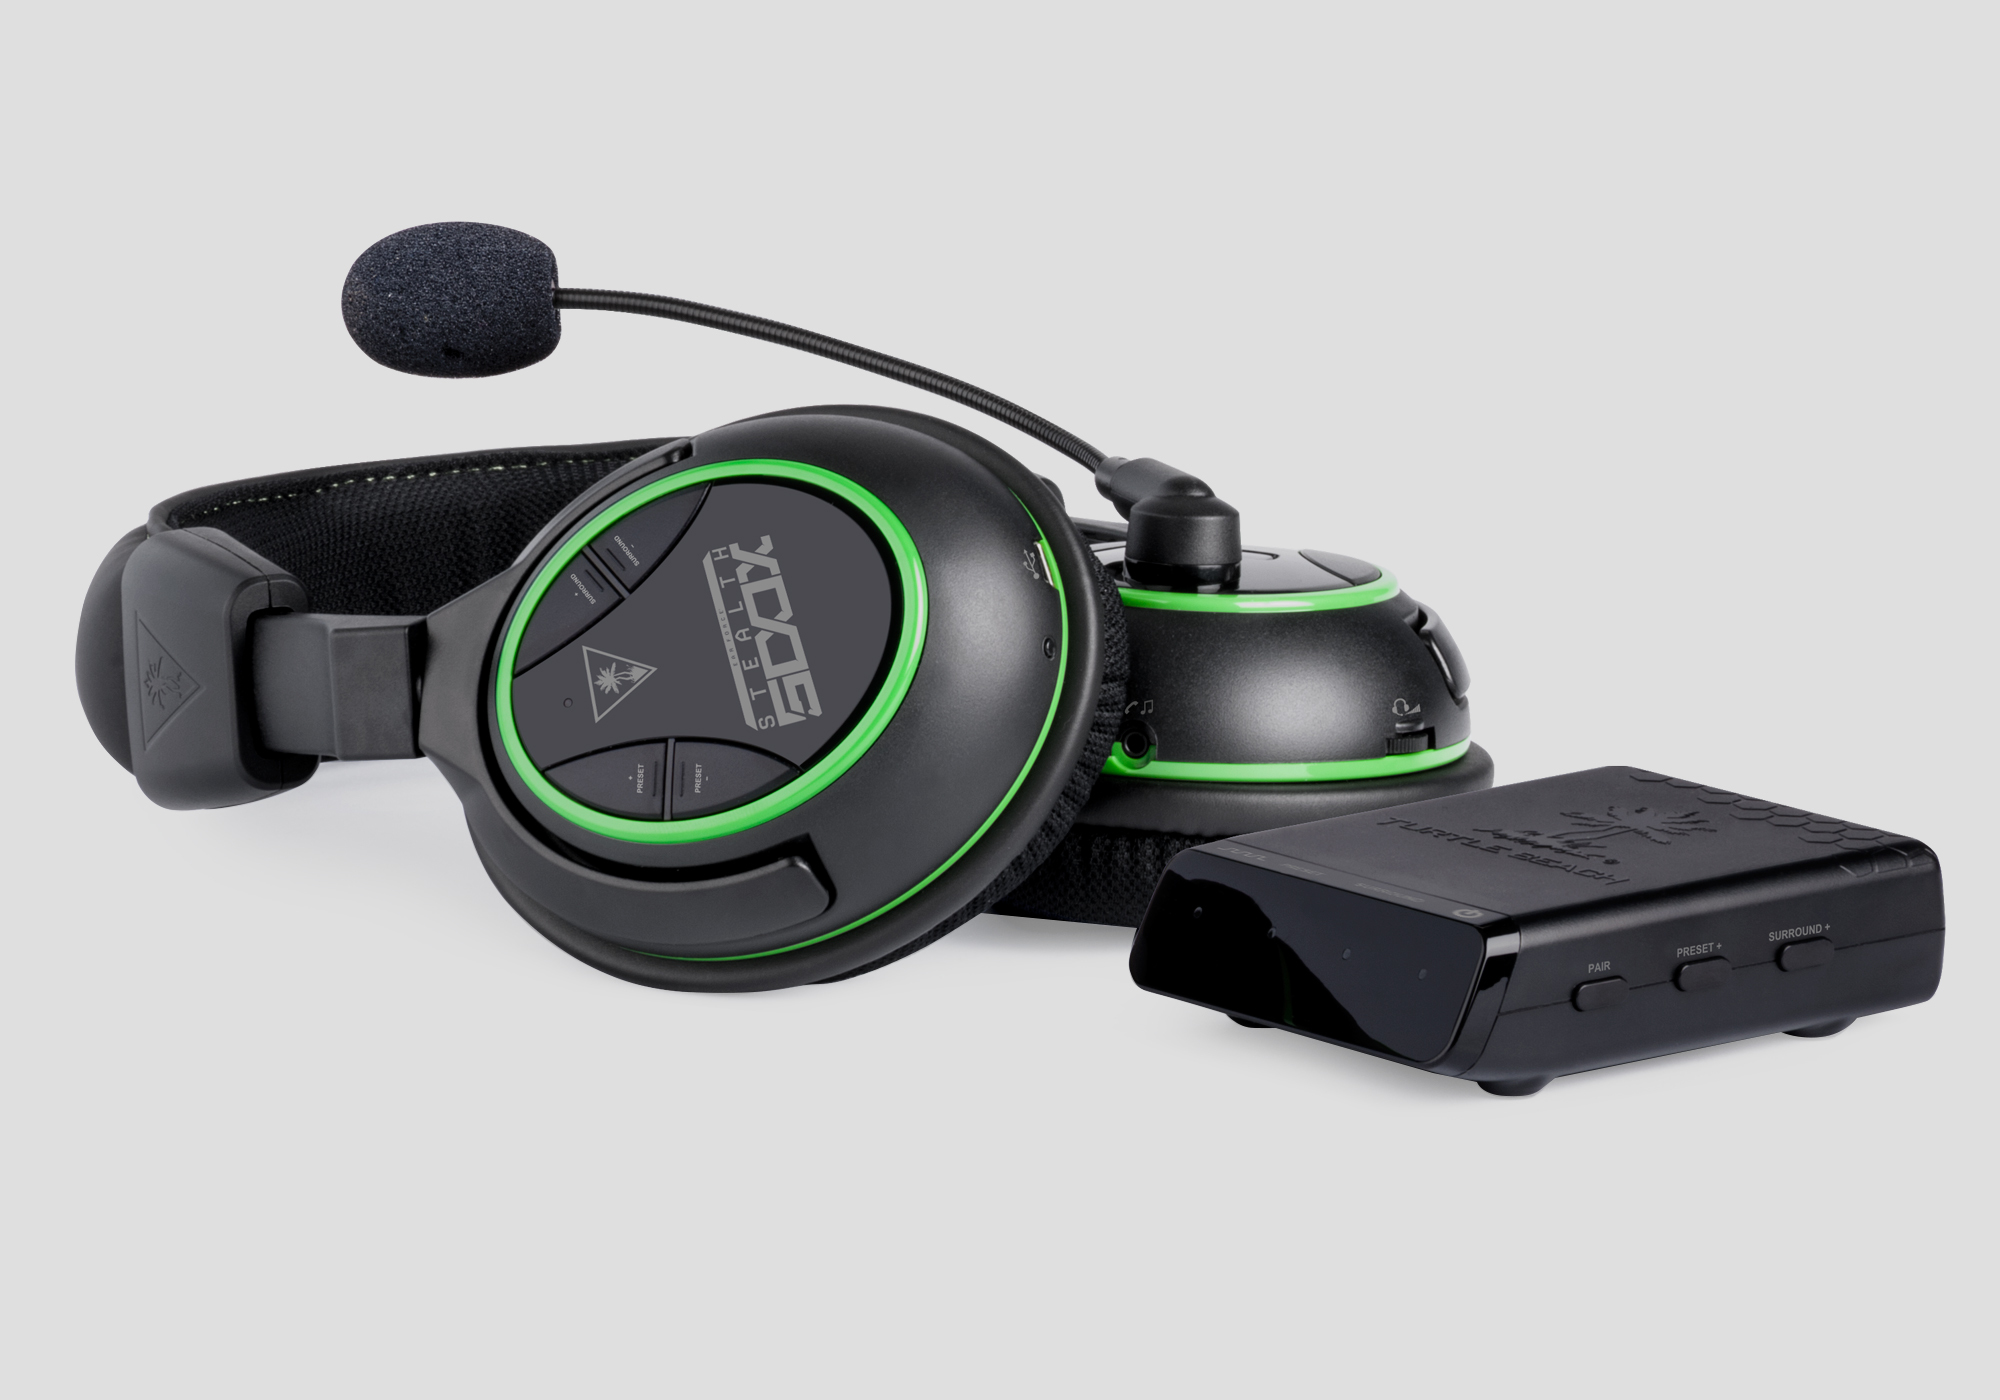 TB Ear Force Stealth 500X Gaming Headset